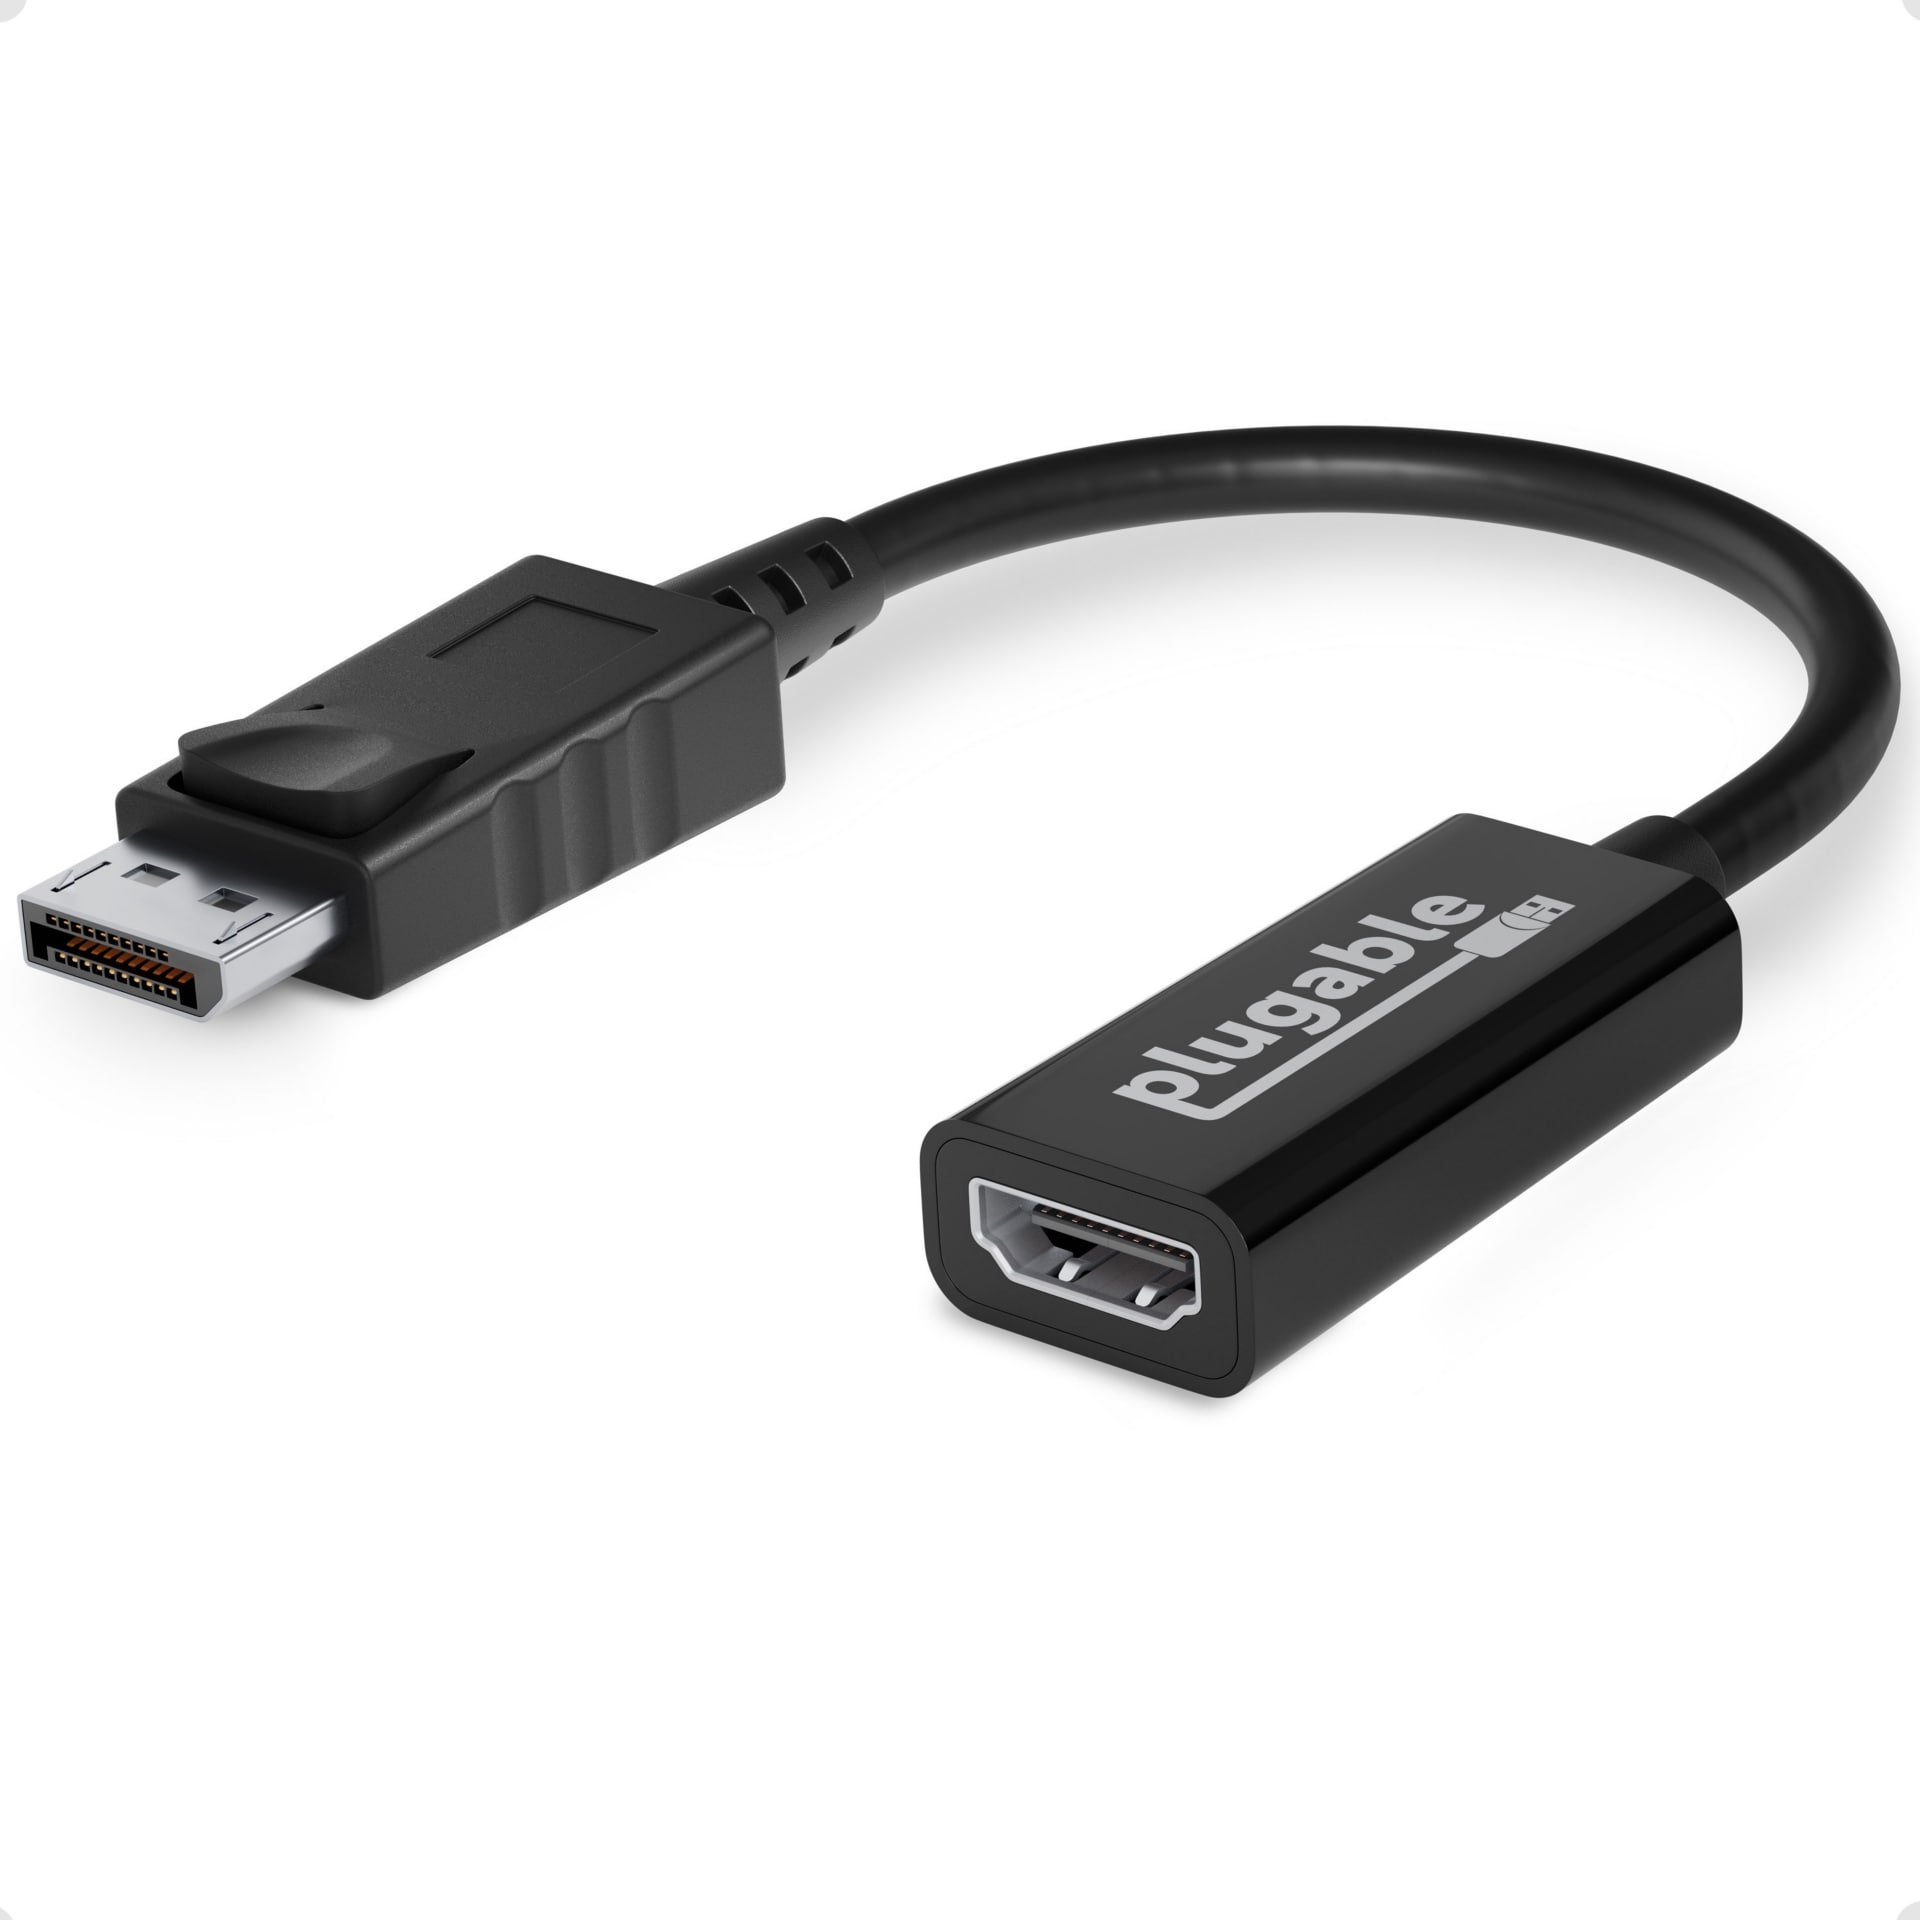 Active DisplayPort to HDMI Adapter-HDMI 2.0 to - DP-HDMI - Monitor Cables & Adapters - CDW.com